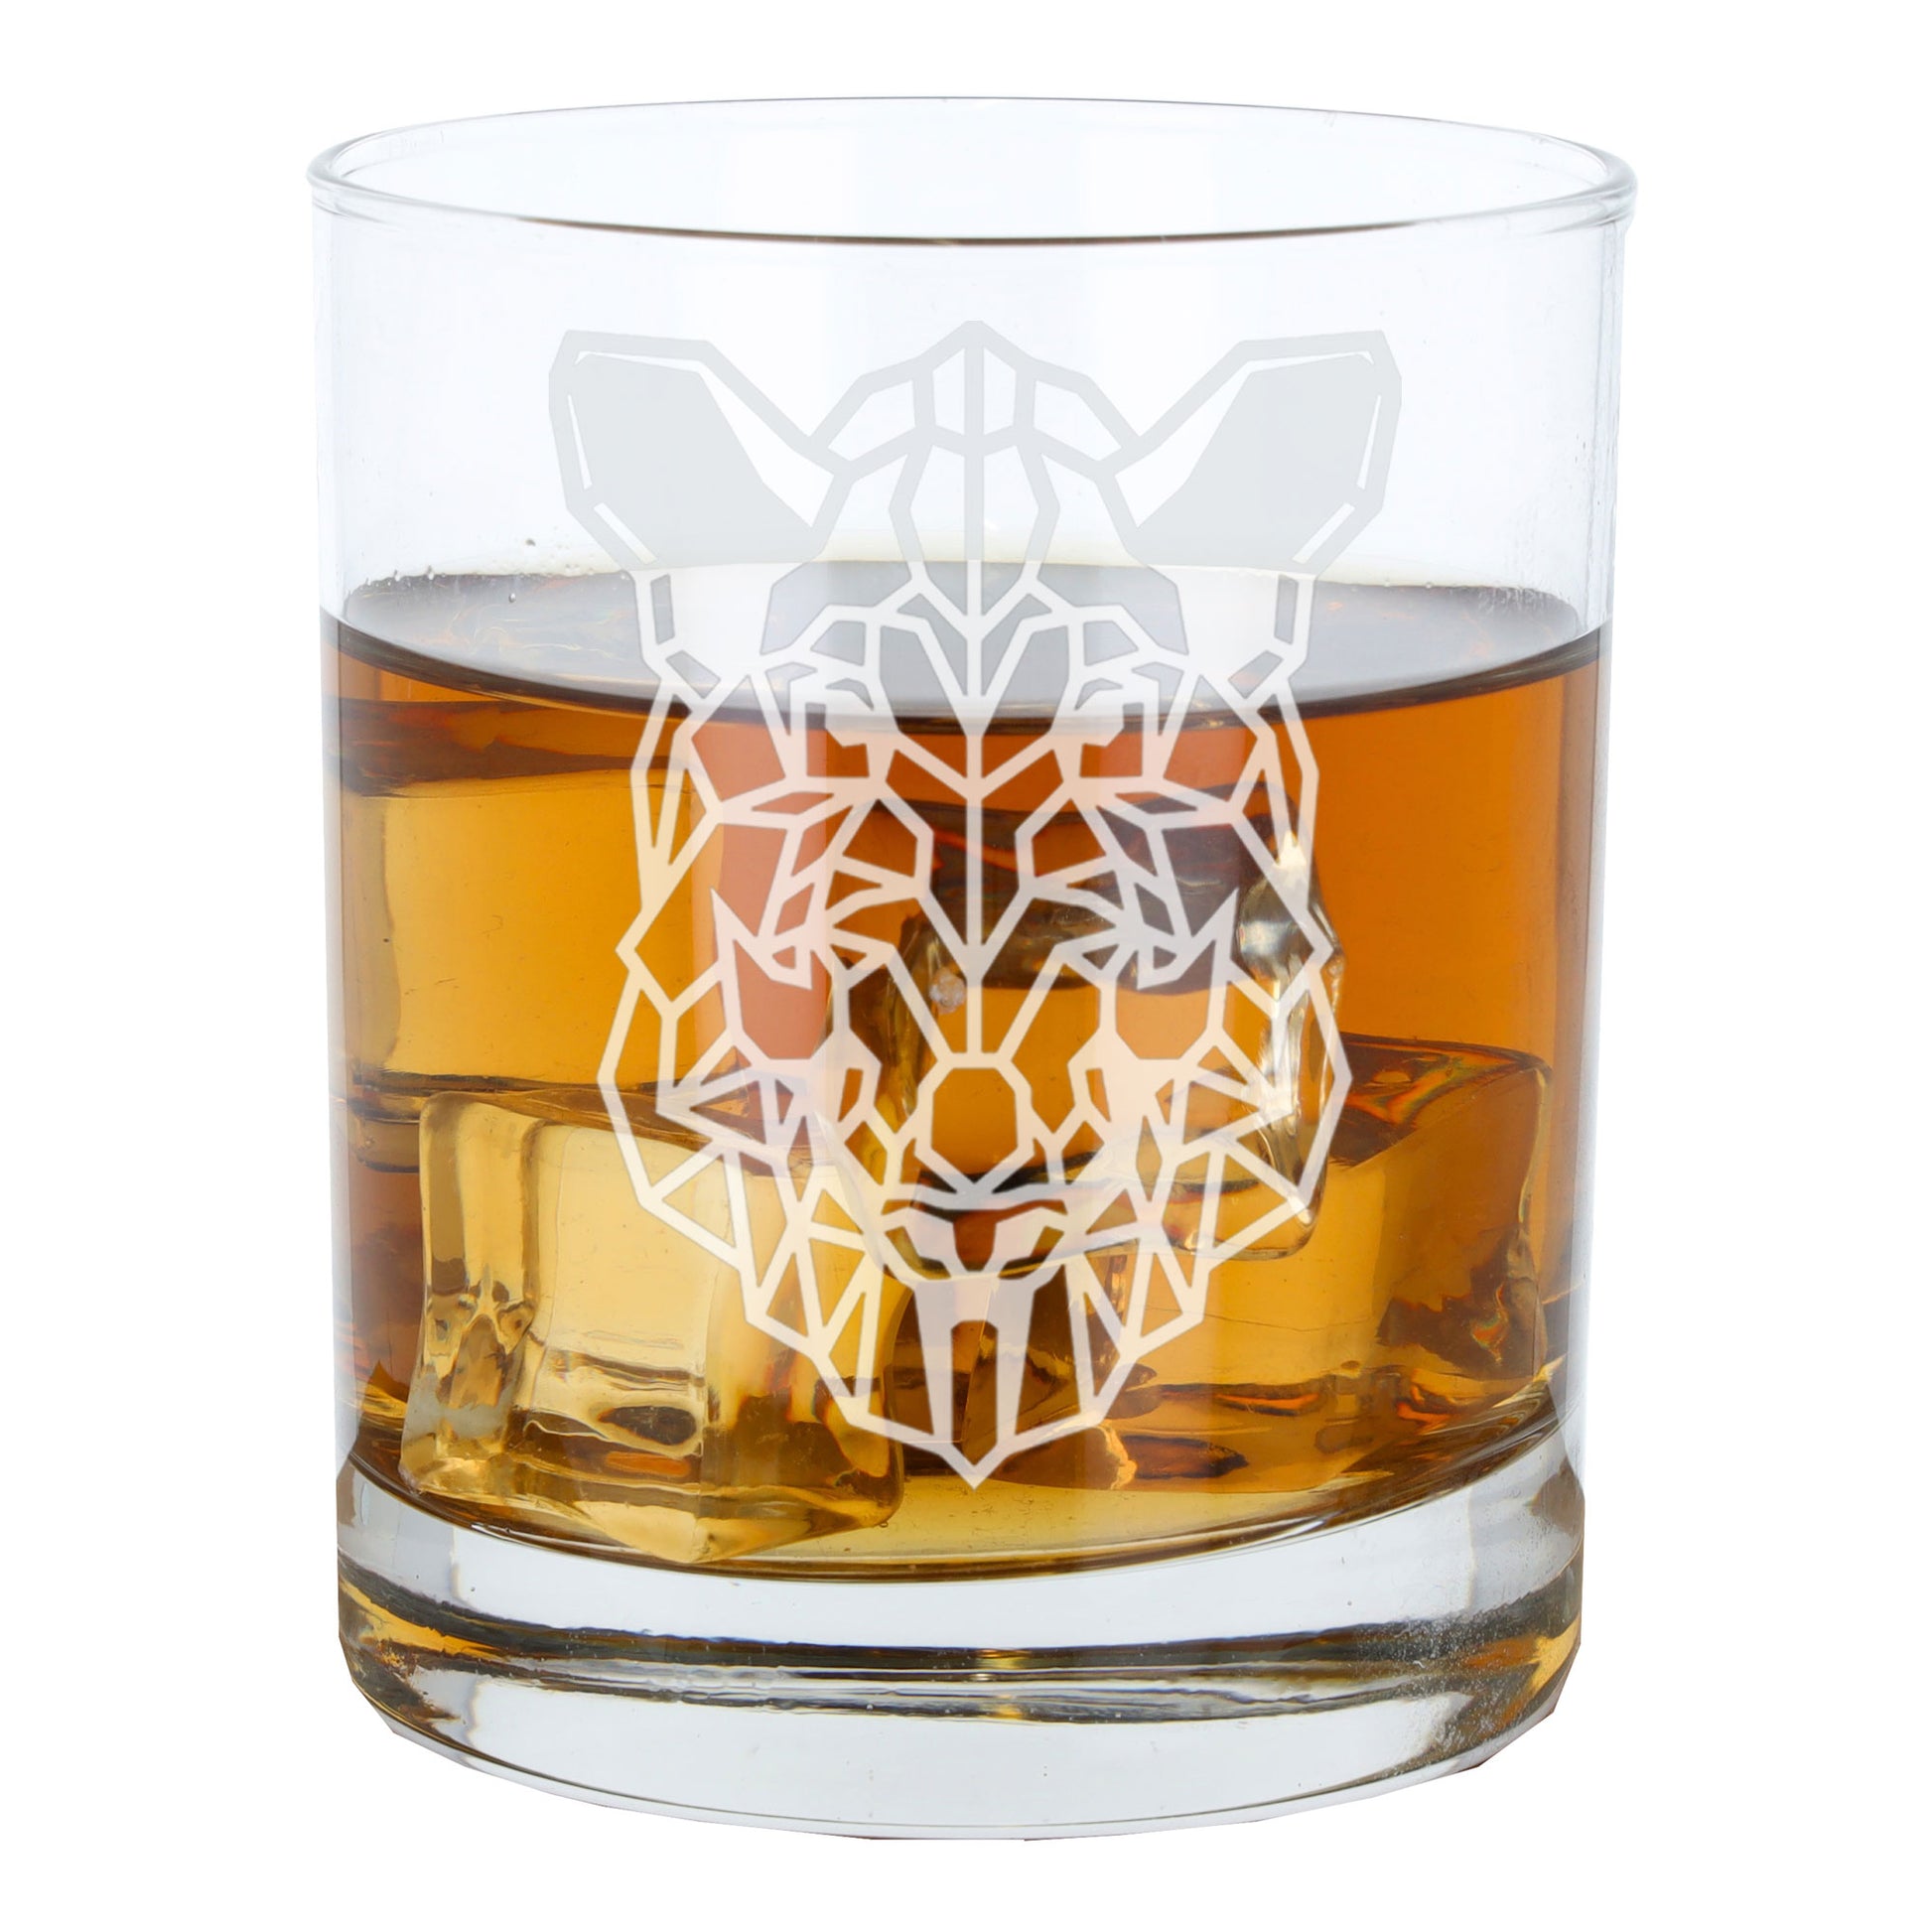 Warthog Engraved Whisky Glass  - Always Looking Good -   